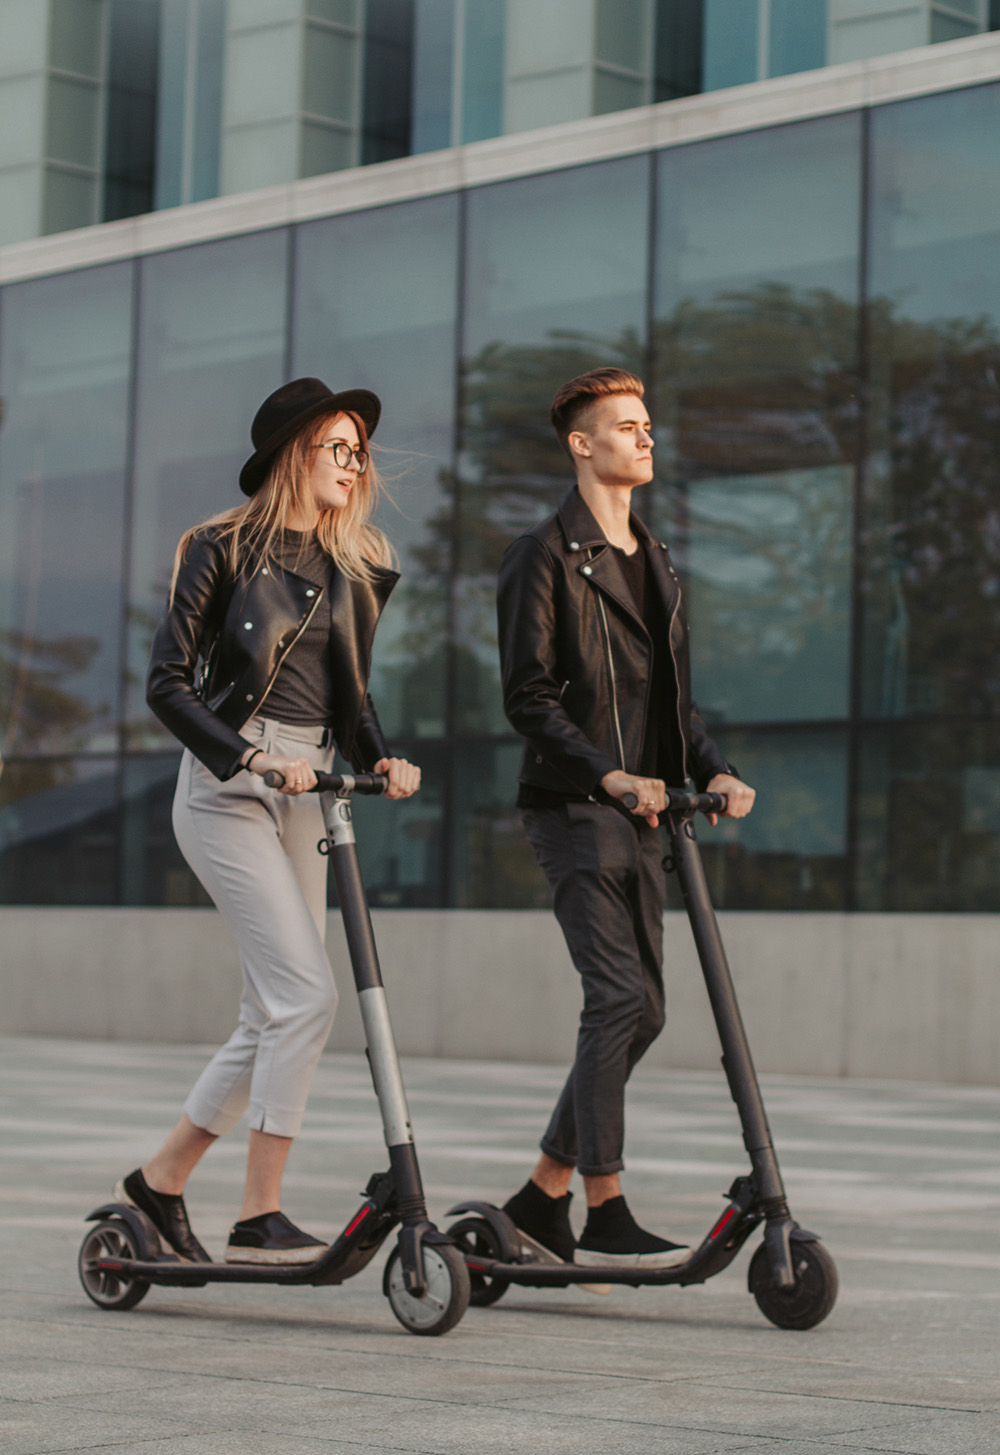 young attractive couple trendy scooters are riding city near big glass building https://gonews.com.tw/wp-content/uploads/2024/02/電動滑板車__Gonews-optimized.jpg